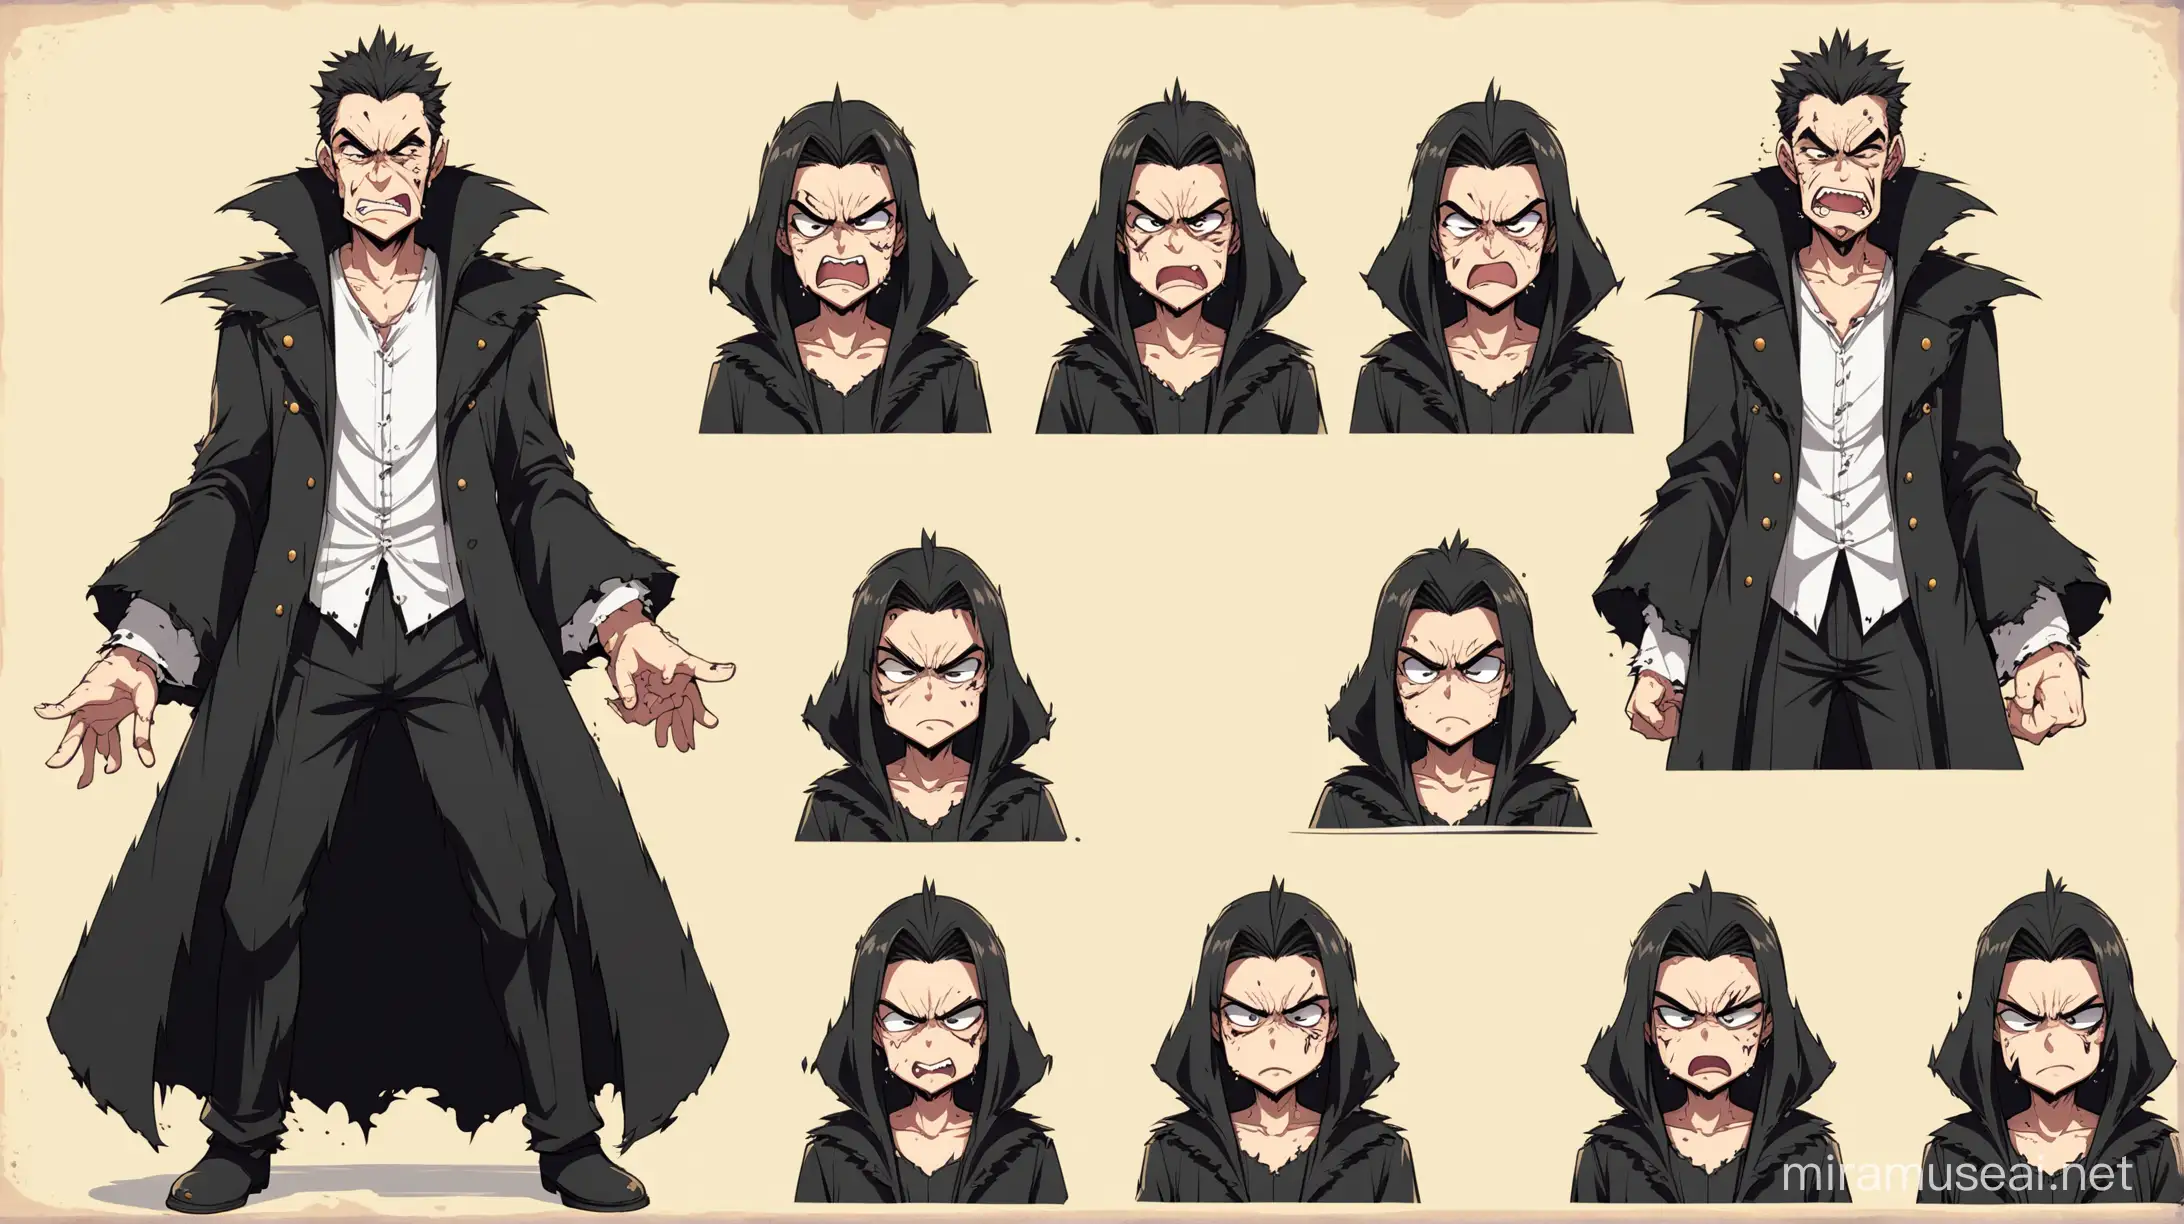 Anime Shabby Villain Character Sheet Expressions of Happiness Anger and Sadness in 2D Medium Shot